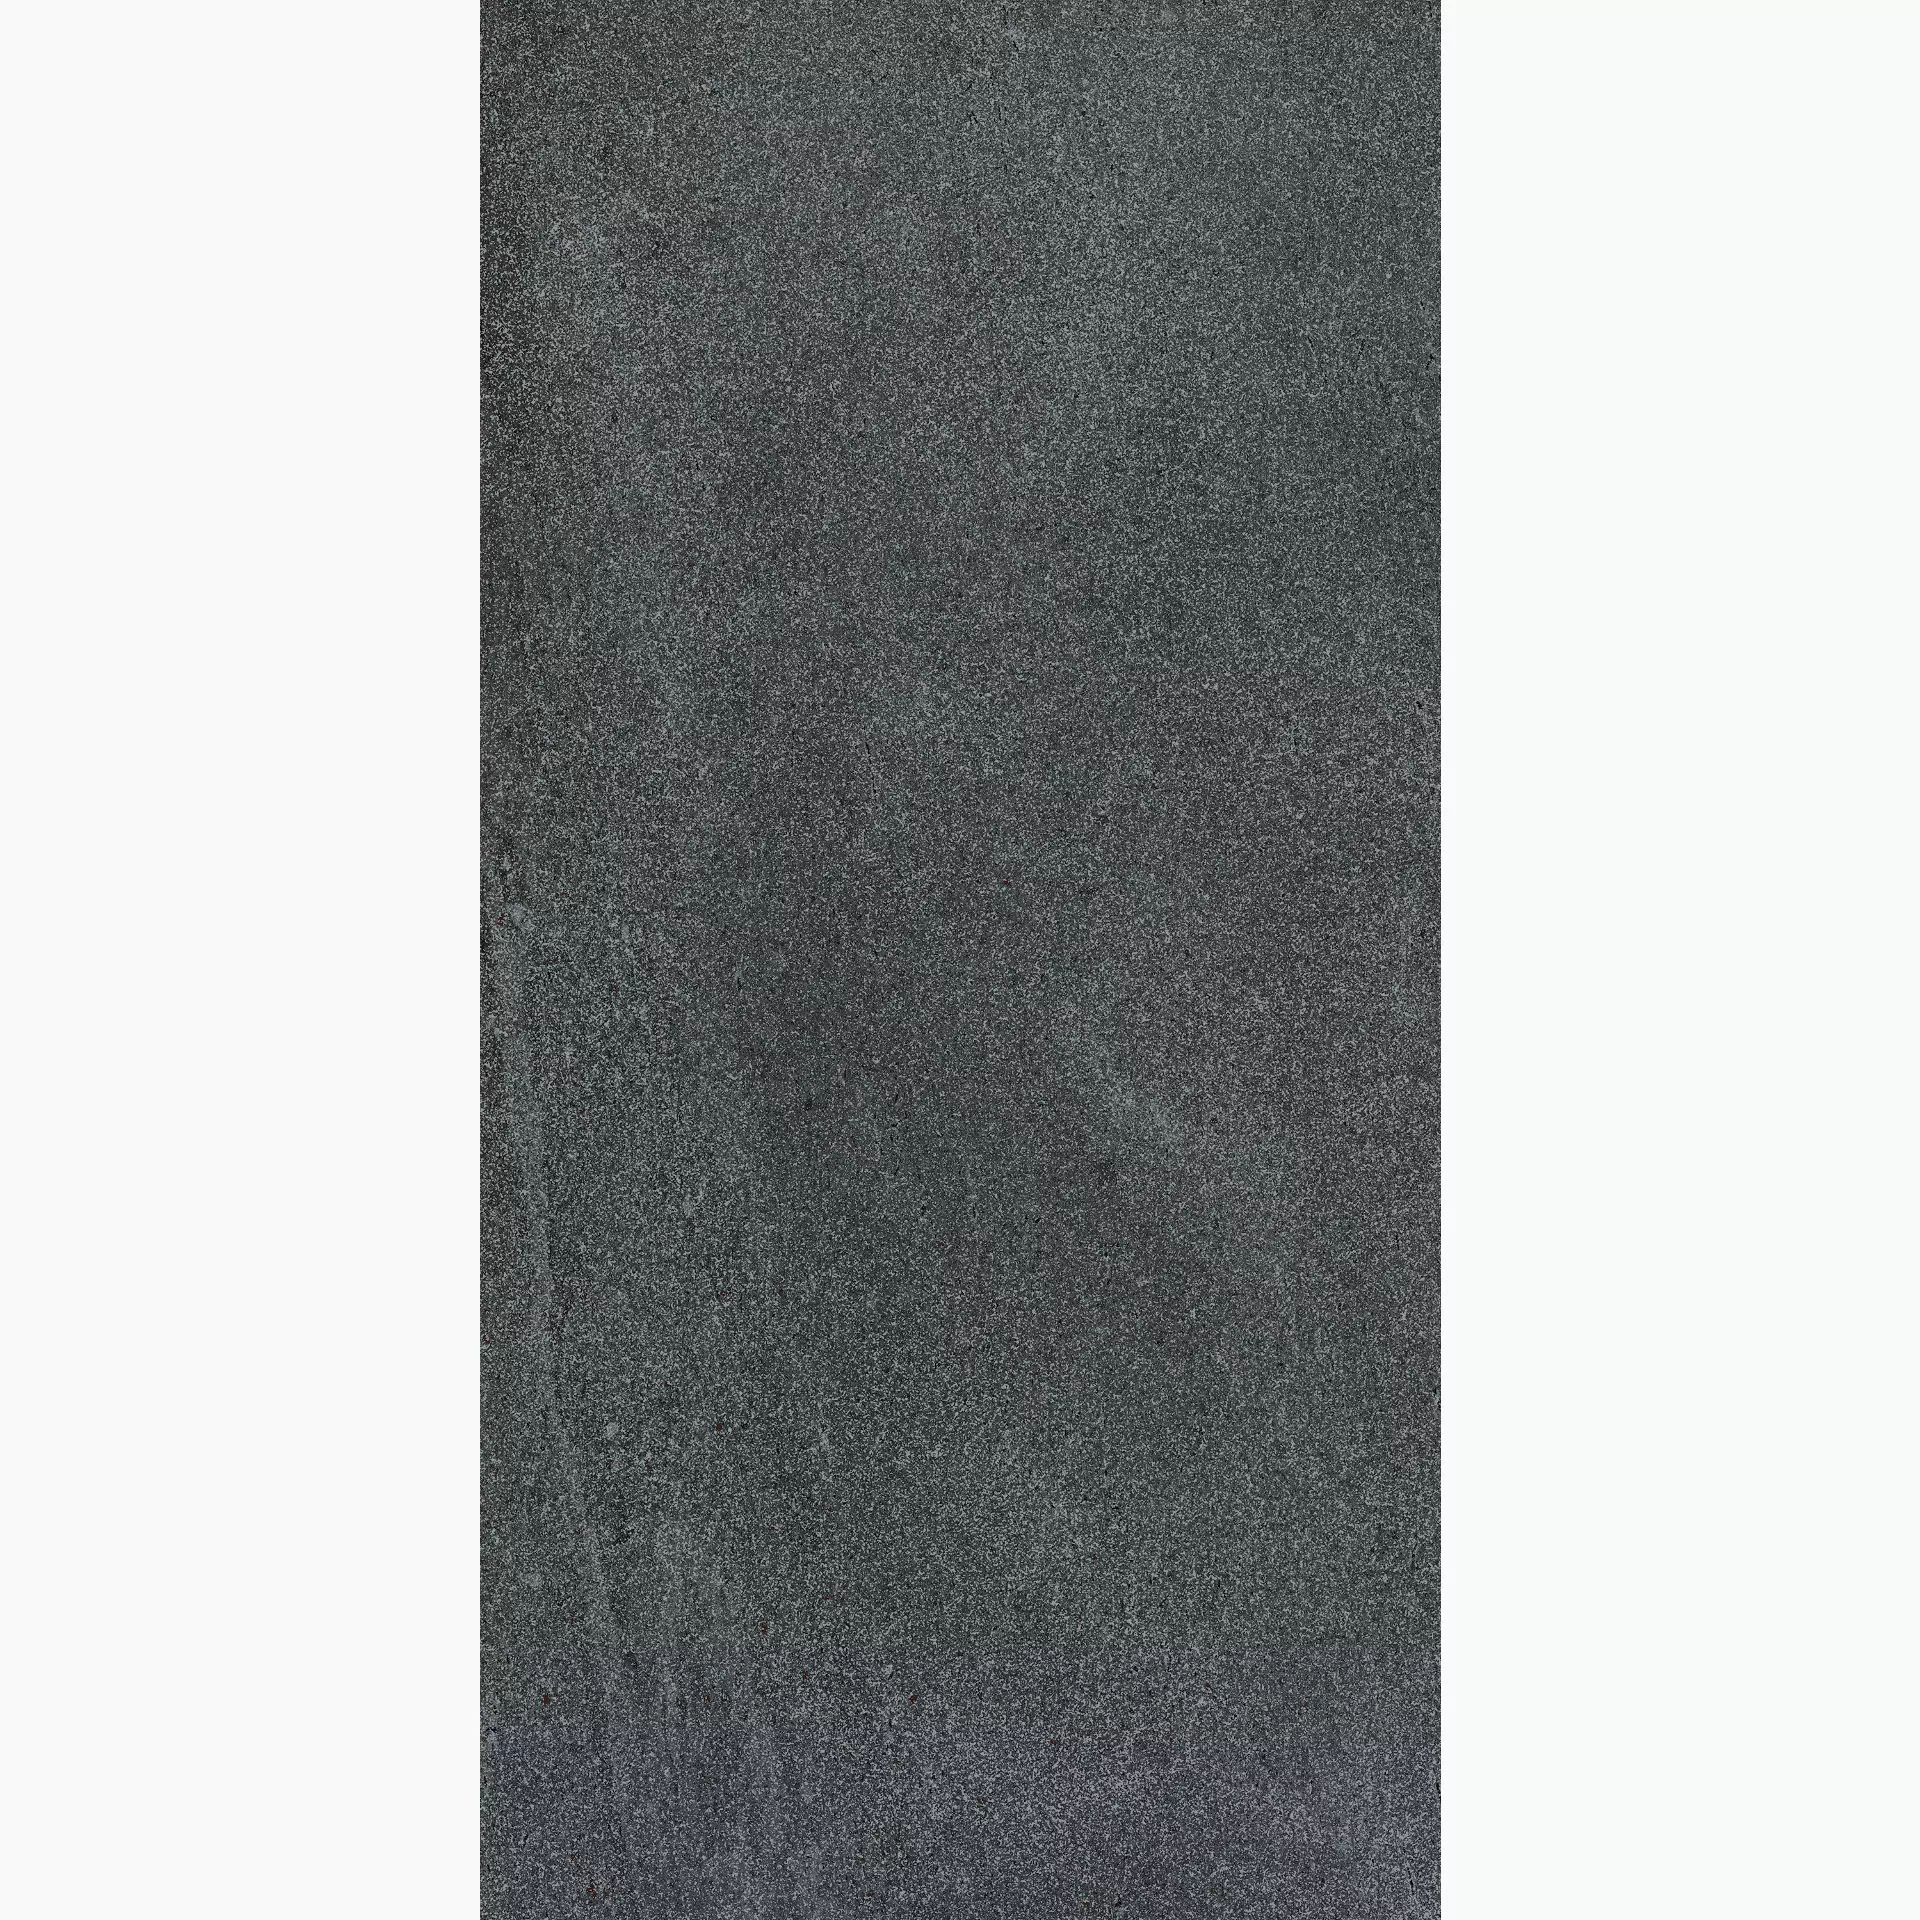 Cottodeste Blend Stone Deep Hammered Protect EGXBS60 60x120cm rectified 20mm